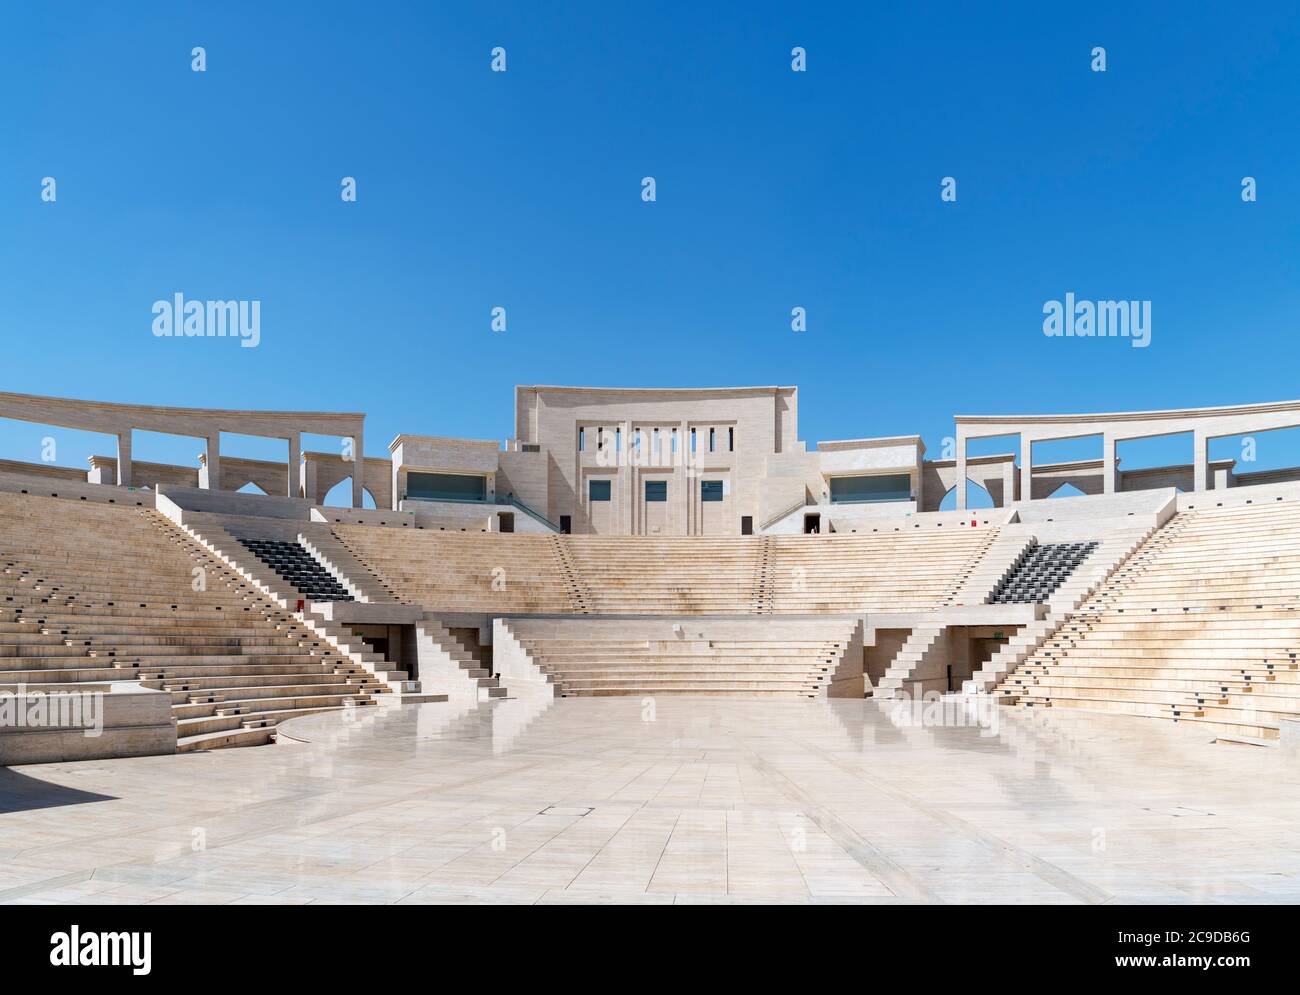 The Amphitheater at the Katara Cultural Village, Doha, Qatar, Middle East Stock Photo